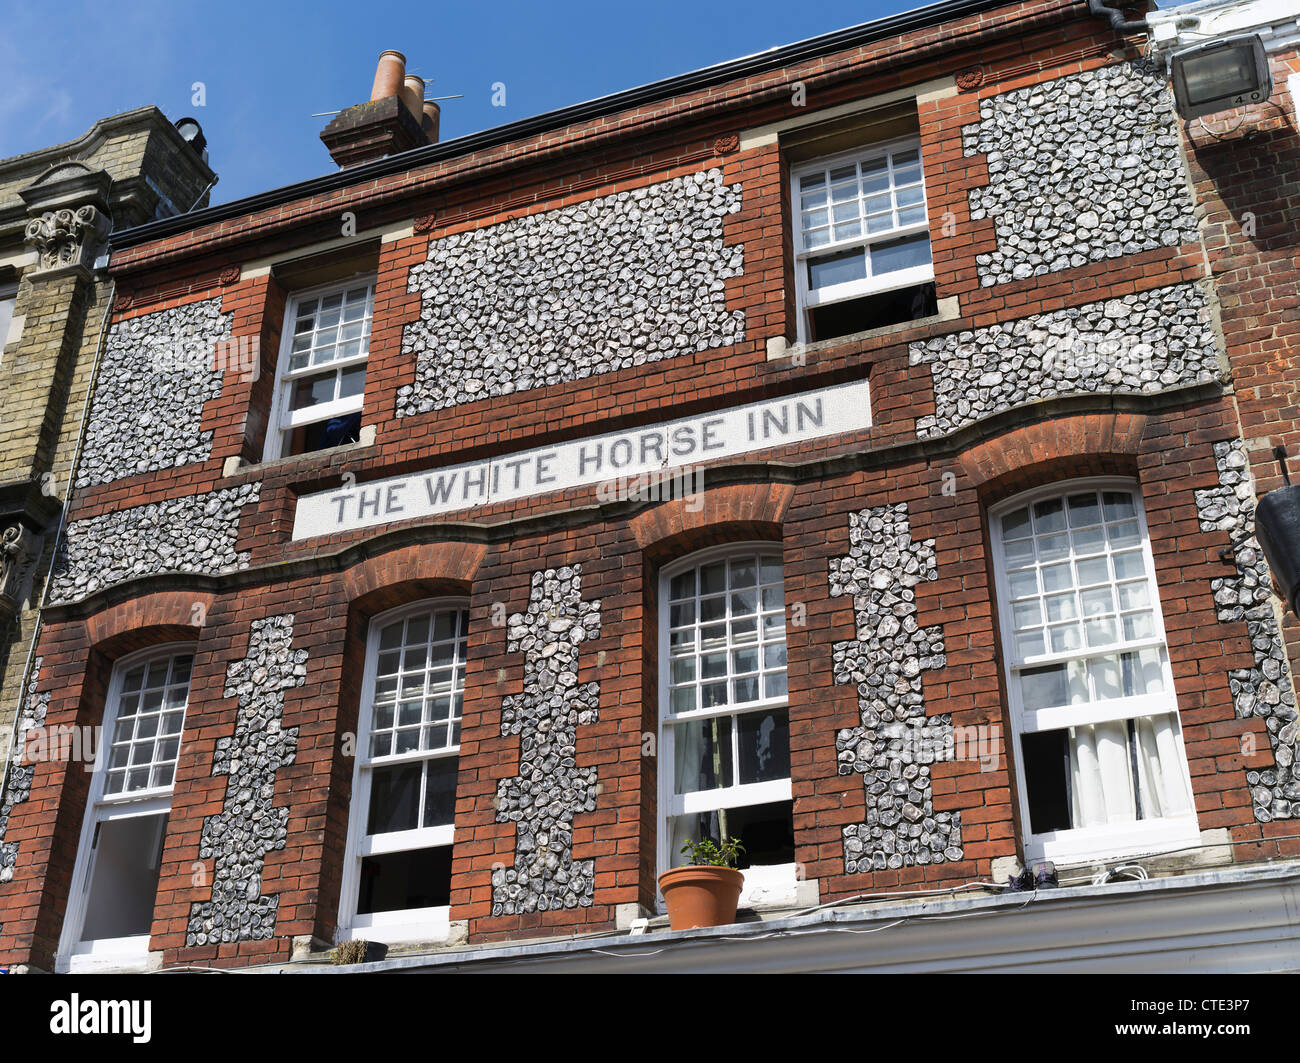 dh White Horse Inn WINCHESTER HAMPSHIRE ENGLAND English Flint stone building with red brick public house exterior city buildings uk Stock Photo